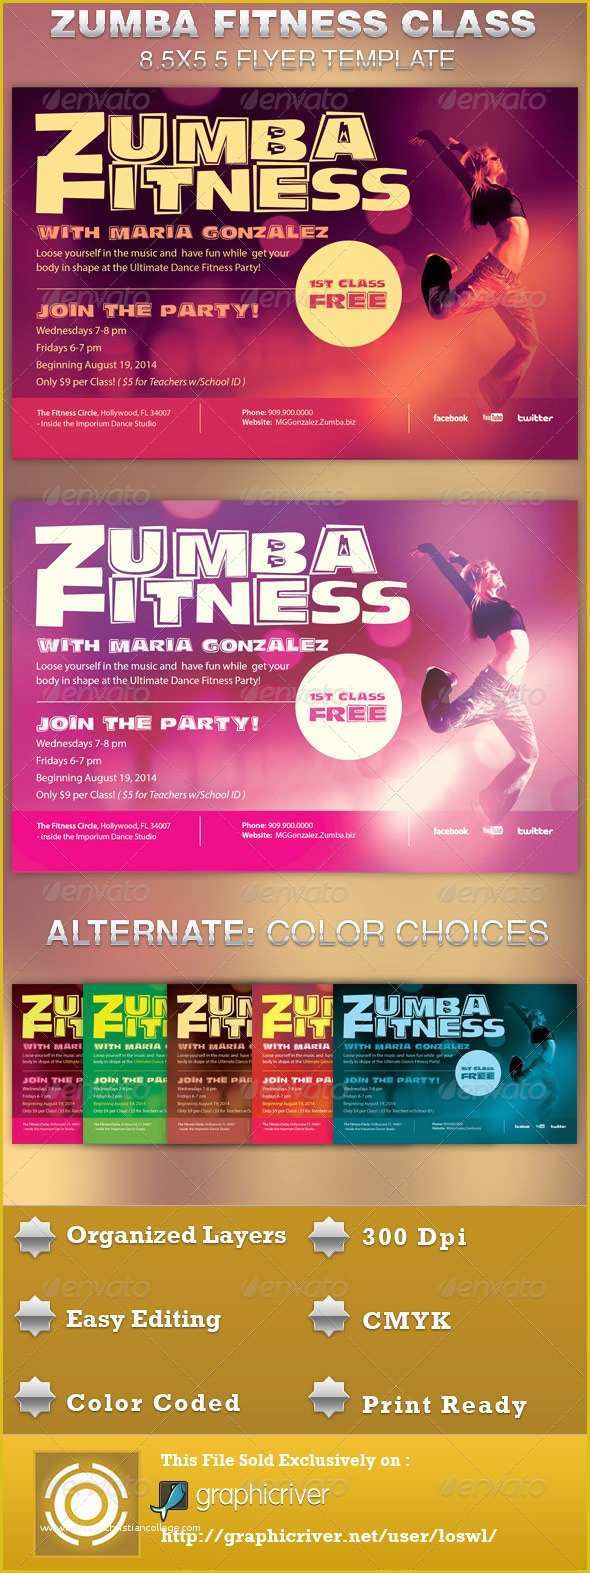 Fitness Poster Template Free Of Zumba Fitness Class Flyer Template On Behance